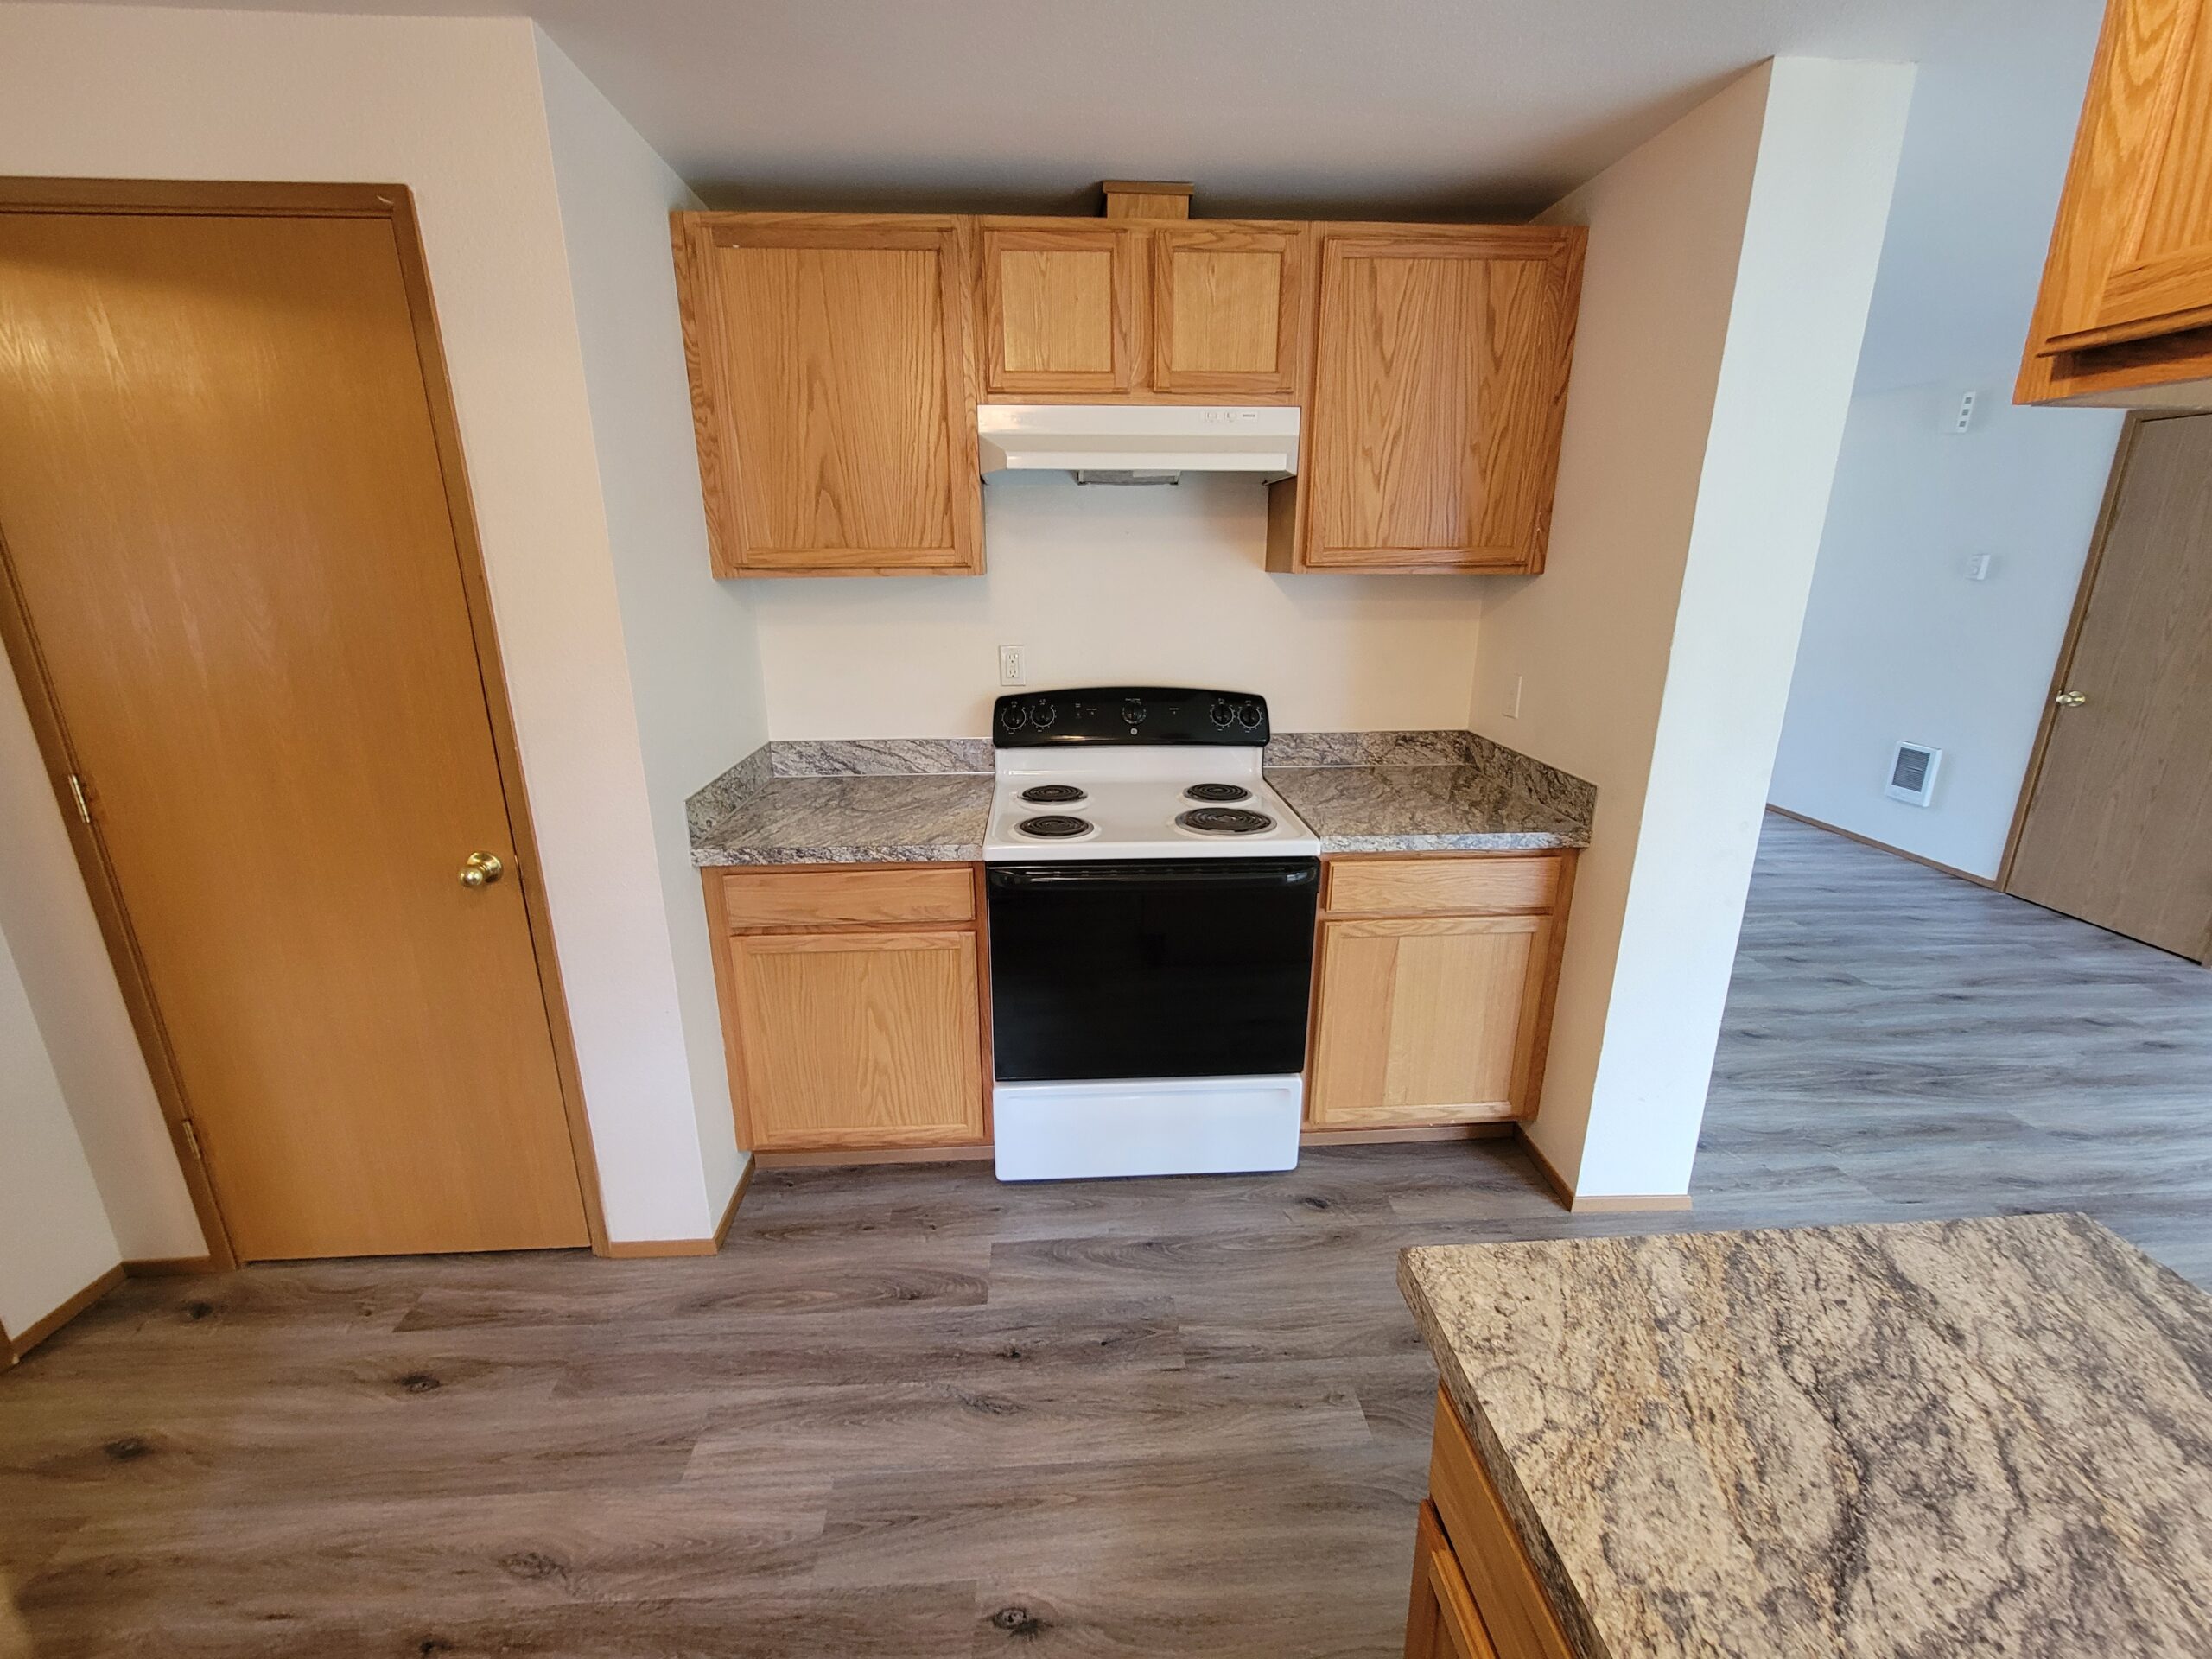 Rare, nicely remodeled 2 bed 1.5 bath with a garage!